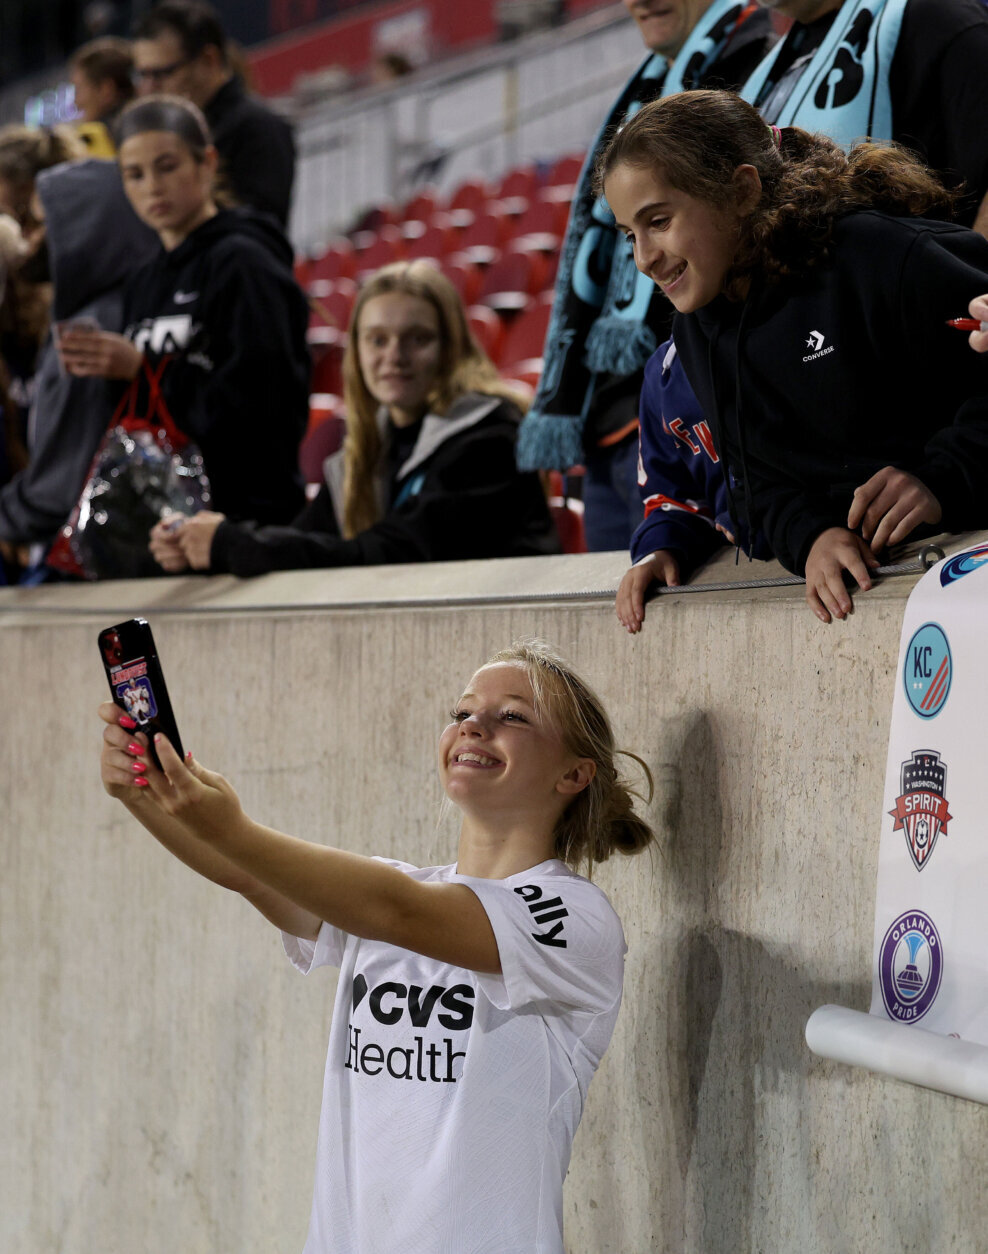 HARRISON, NEW JERSEY - APRIL 19: Chloe Ricketts #39 of the Washington Spirit greets the fans after the match against the NJ/NY Gotham FC during the 2023 NWSL Challenge Cup match at Red Bull Arena on April 19, 2023 in Harrison, New Jersey. The NJ/NY Gotham FC defeated the Washington Spirit 1-0. (Photo by Elsa/Getty Images)